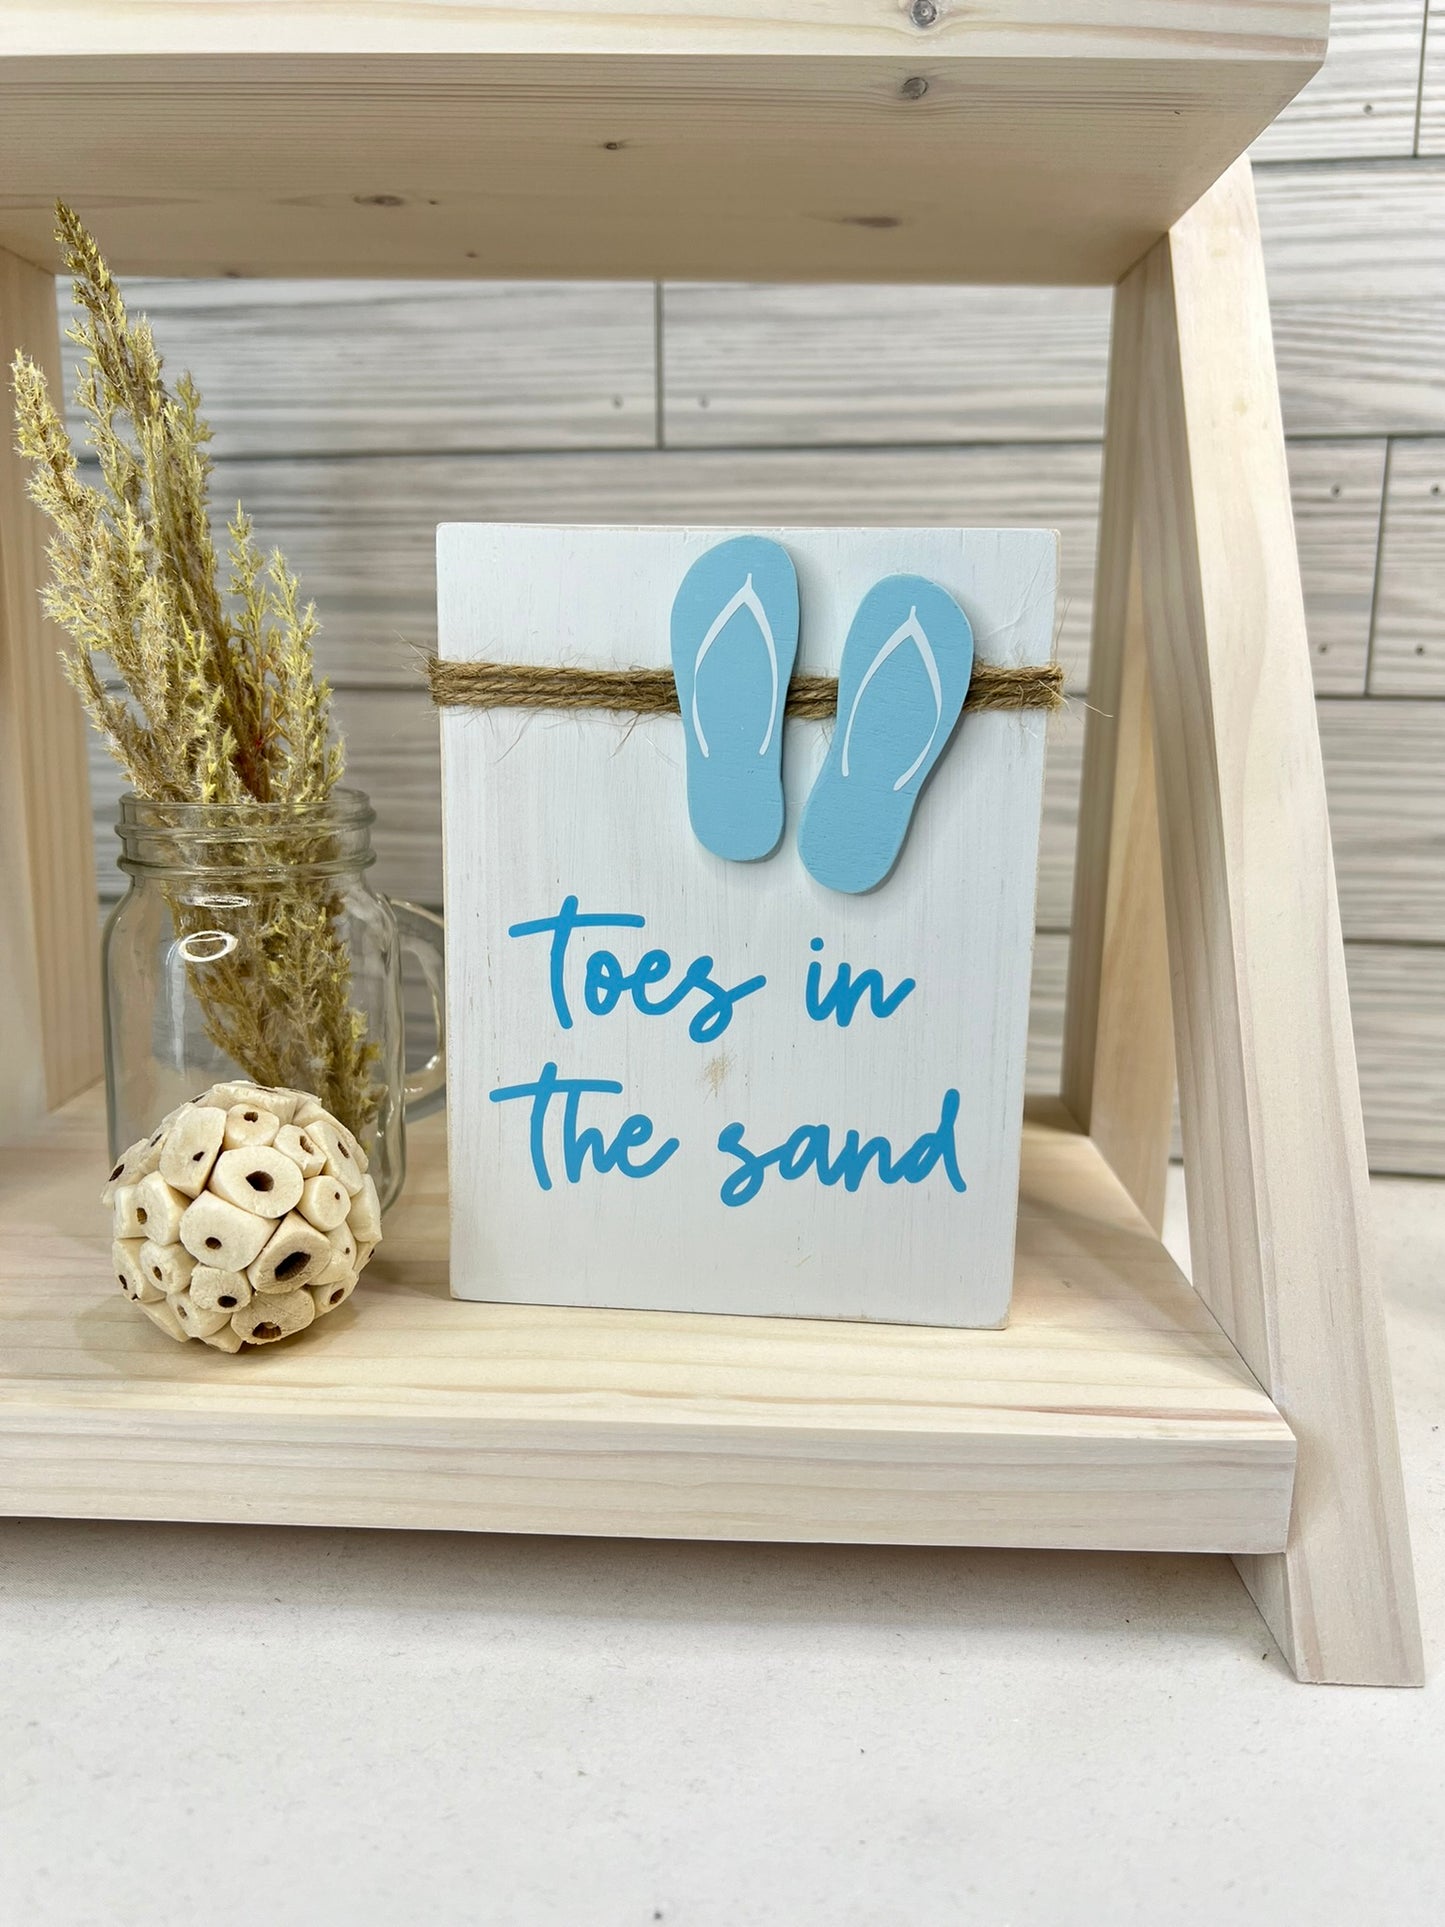 Toes in the Sand Sign